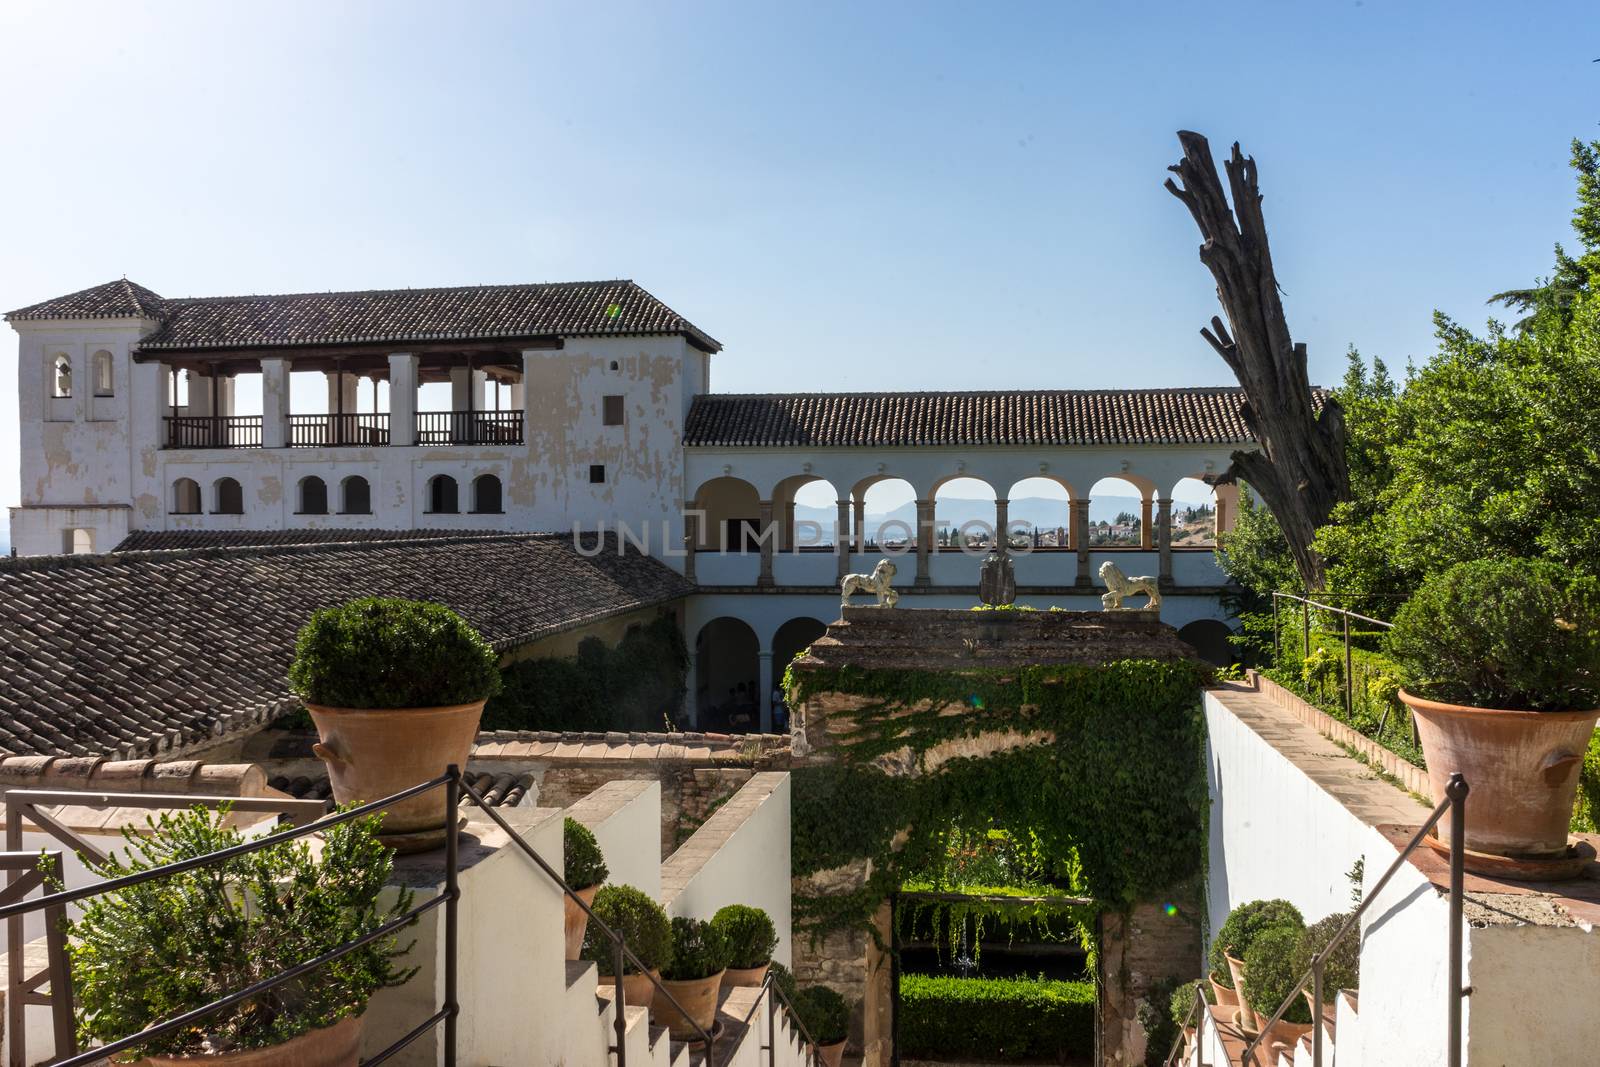 Beautiful view of the Generalife fountain and gardens in Alhambra. GRANADA, SPAIN on a bright sunny day